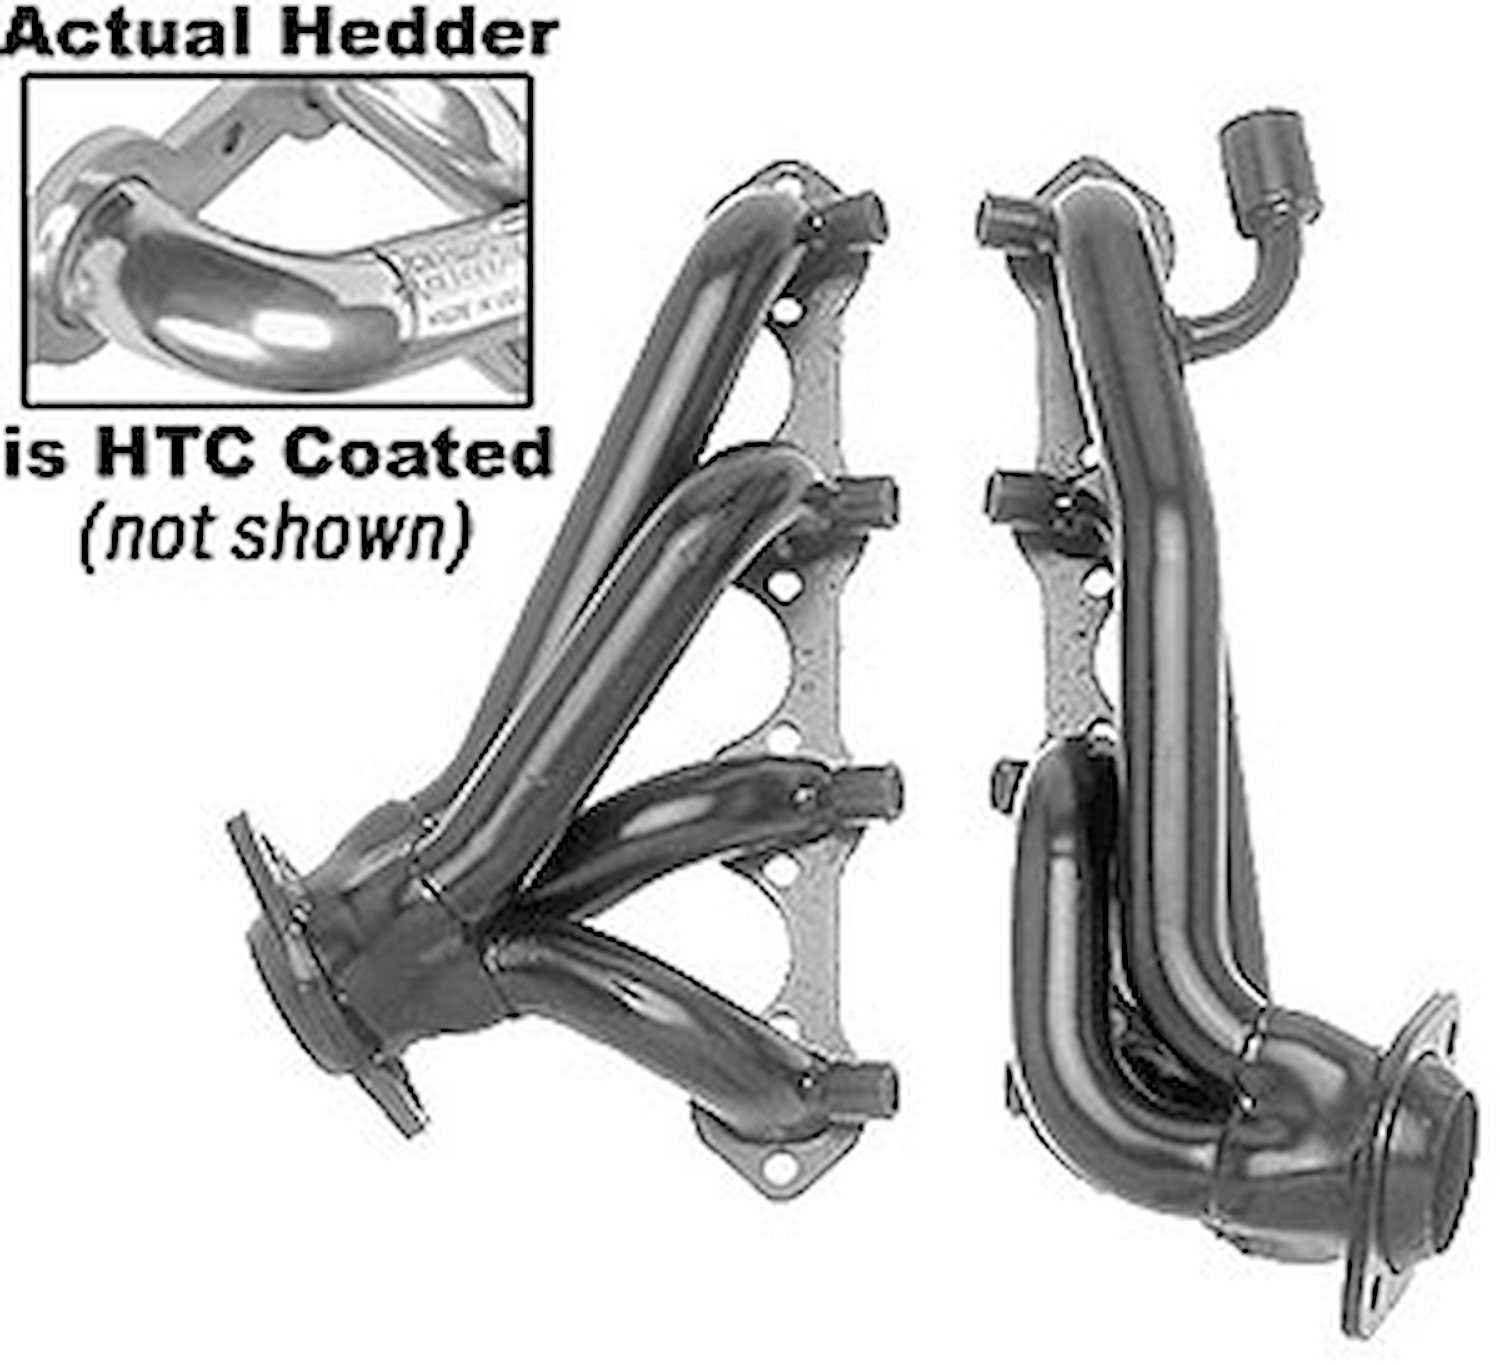 Standard Duty HTC Coated Shorty Headers 1986-96 Ford Bronco & F-150/250/350 5.8L